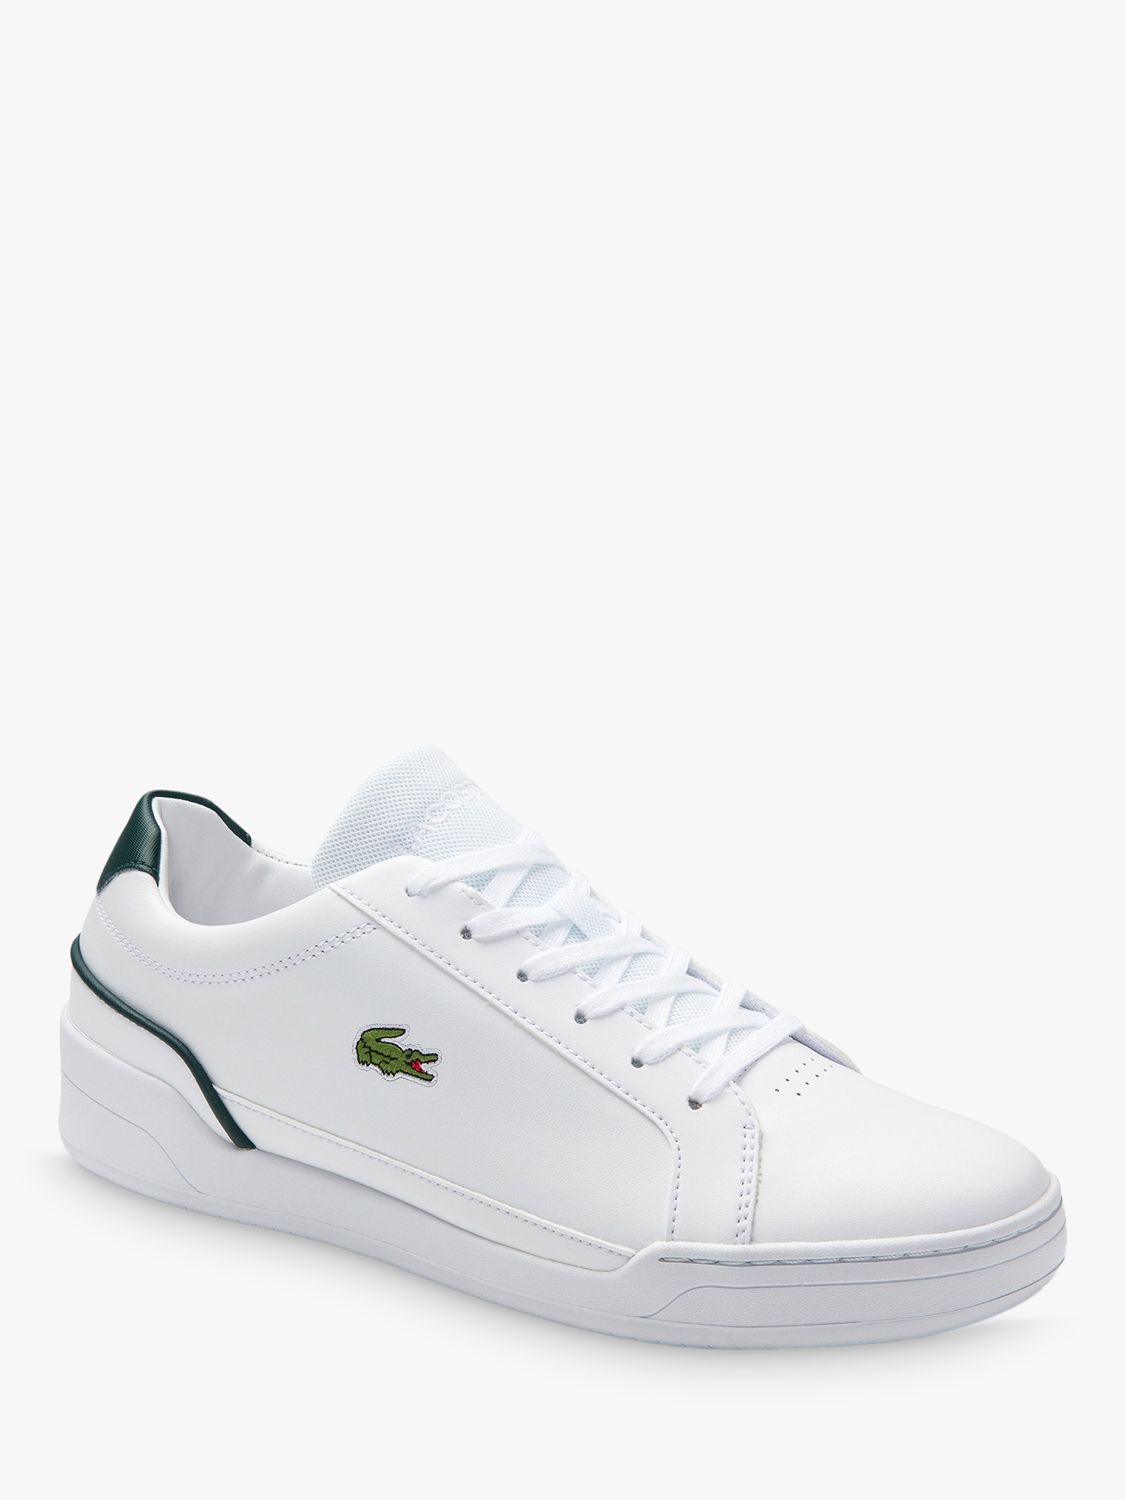 Lacoste Challenge Leather Trainers, White/Dark Green at John Lewis ...